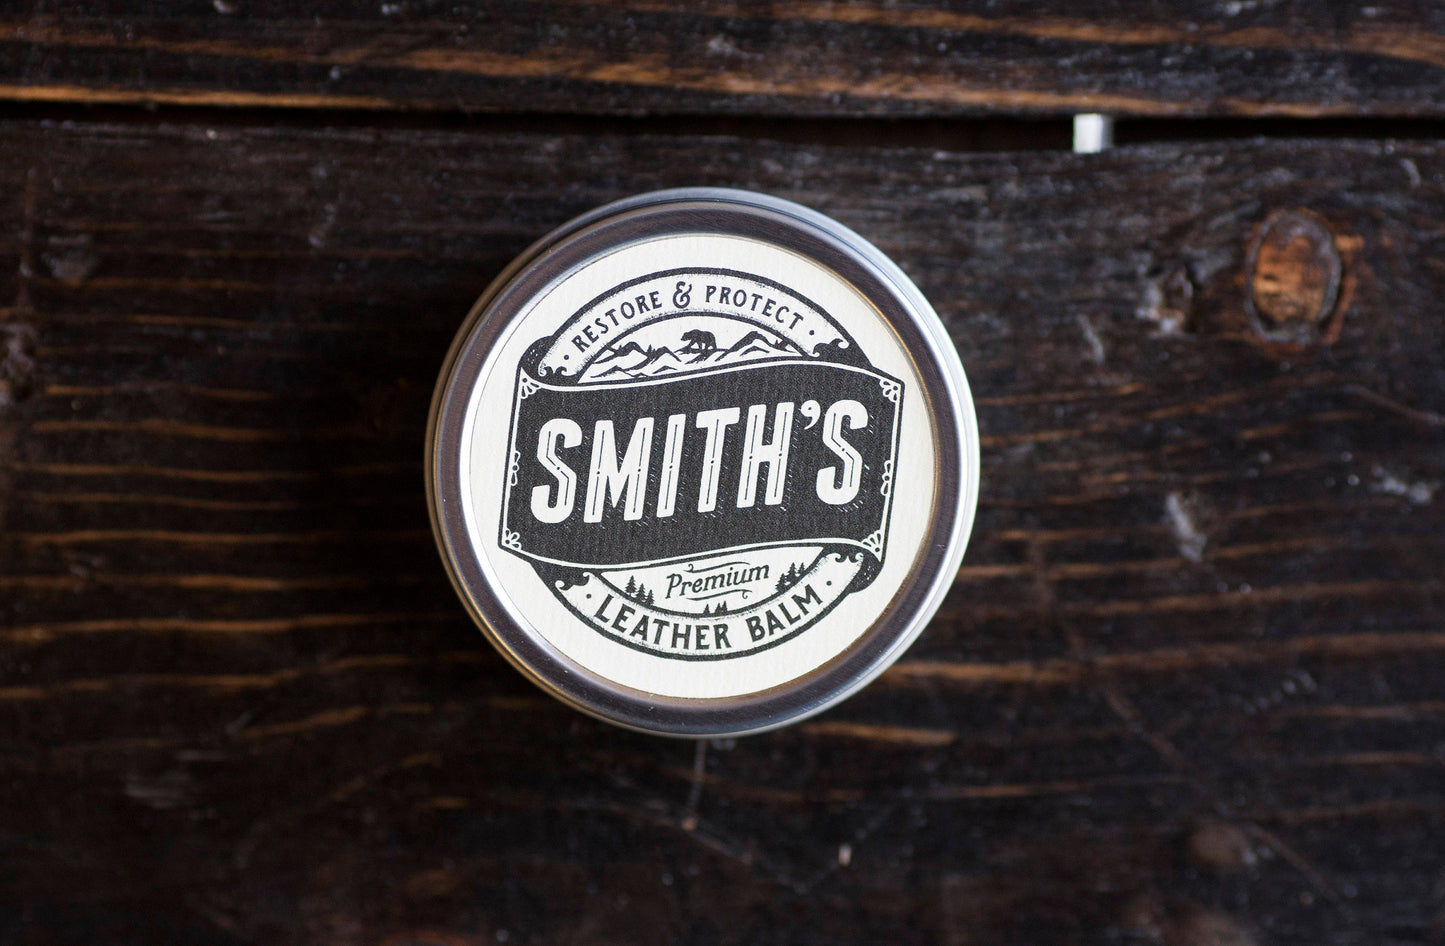 Smith's Leather Balm - Handmade using only three all natural ingredients